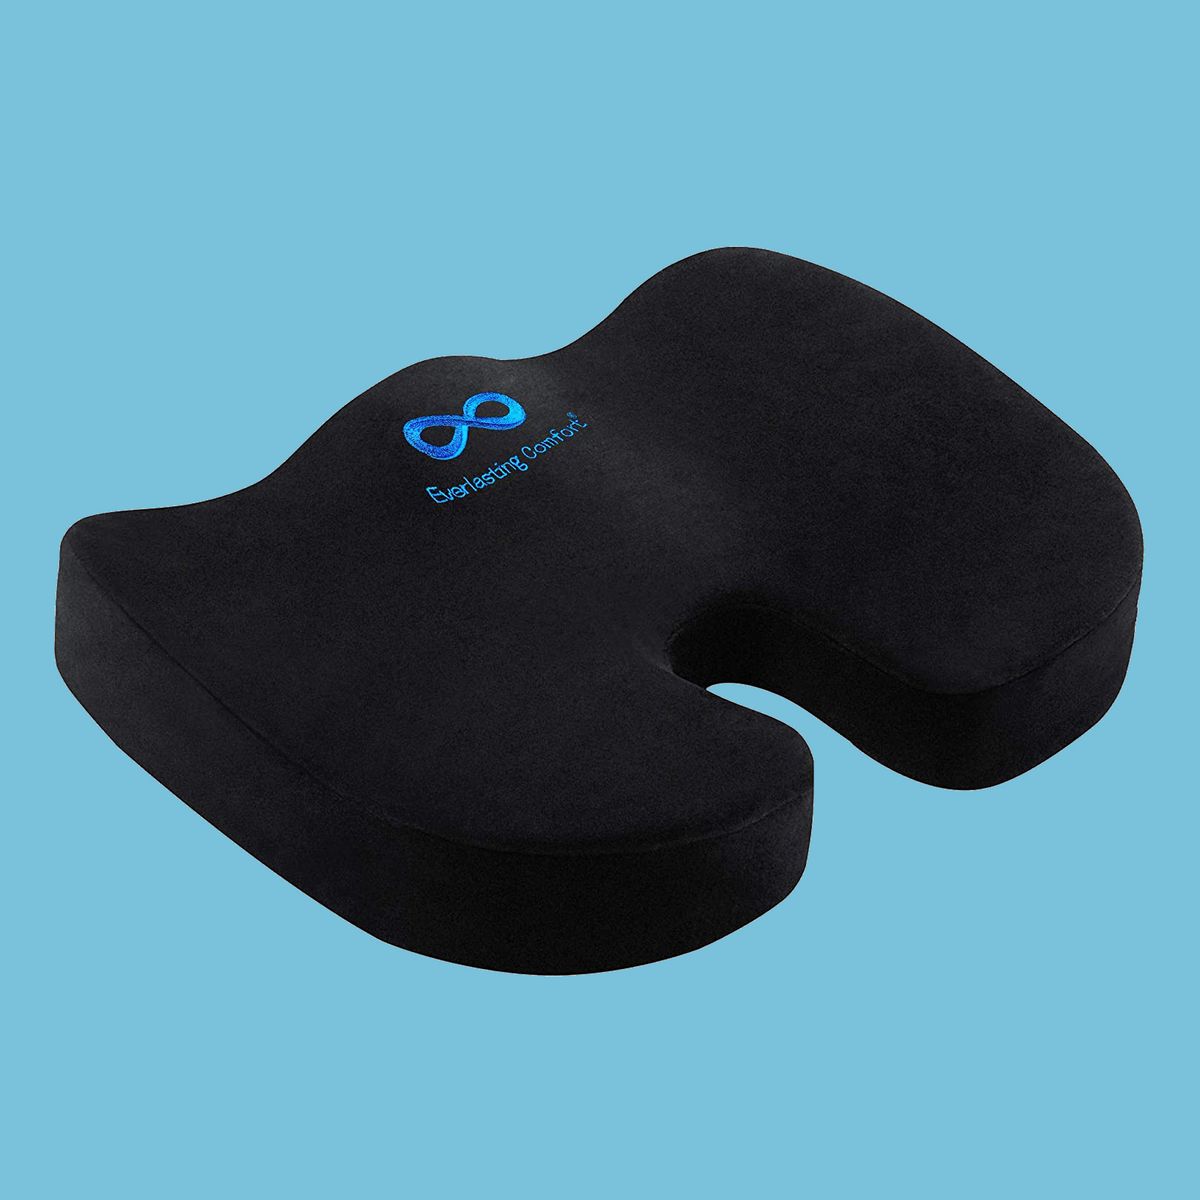 Purple Enhanced Double Non-slip Seat Cushion for Tailbone Pain Relief for  sale online